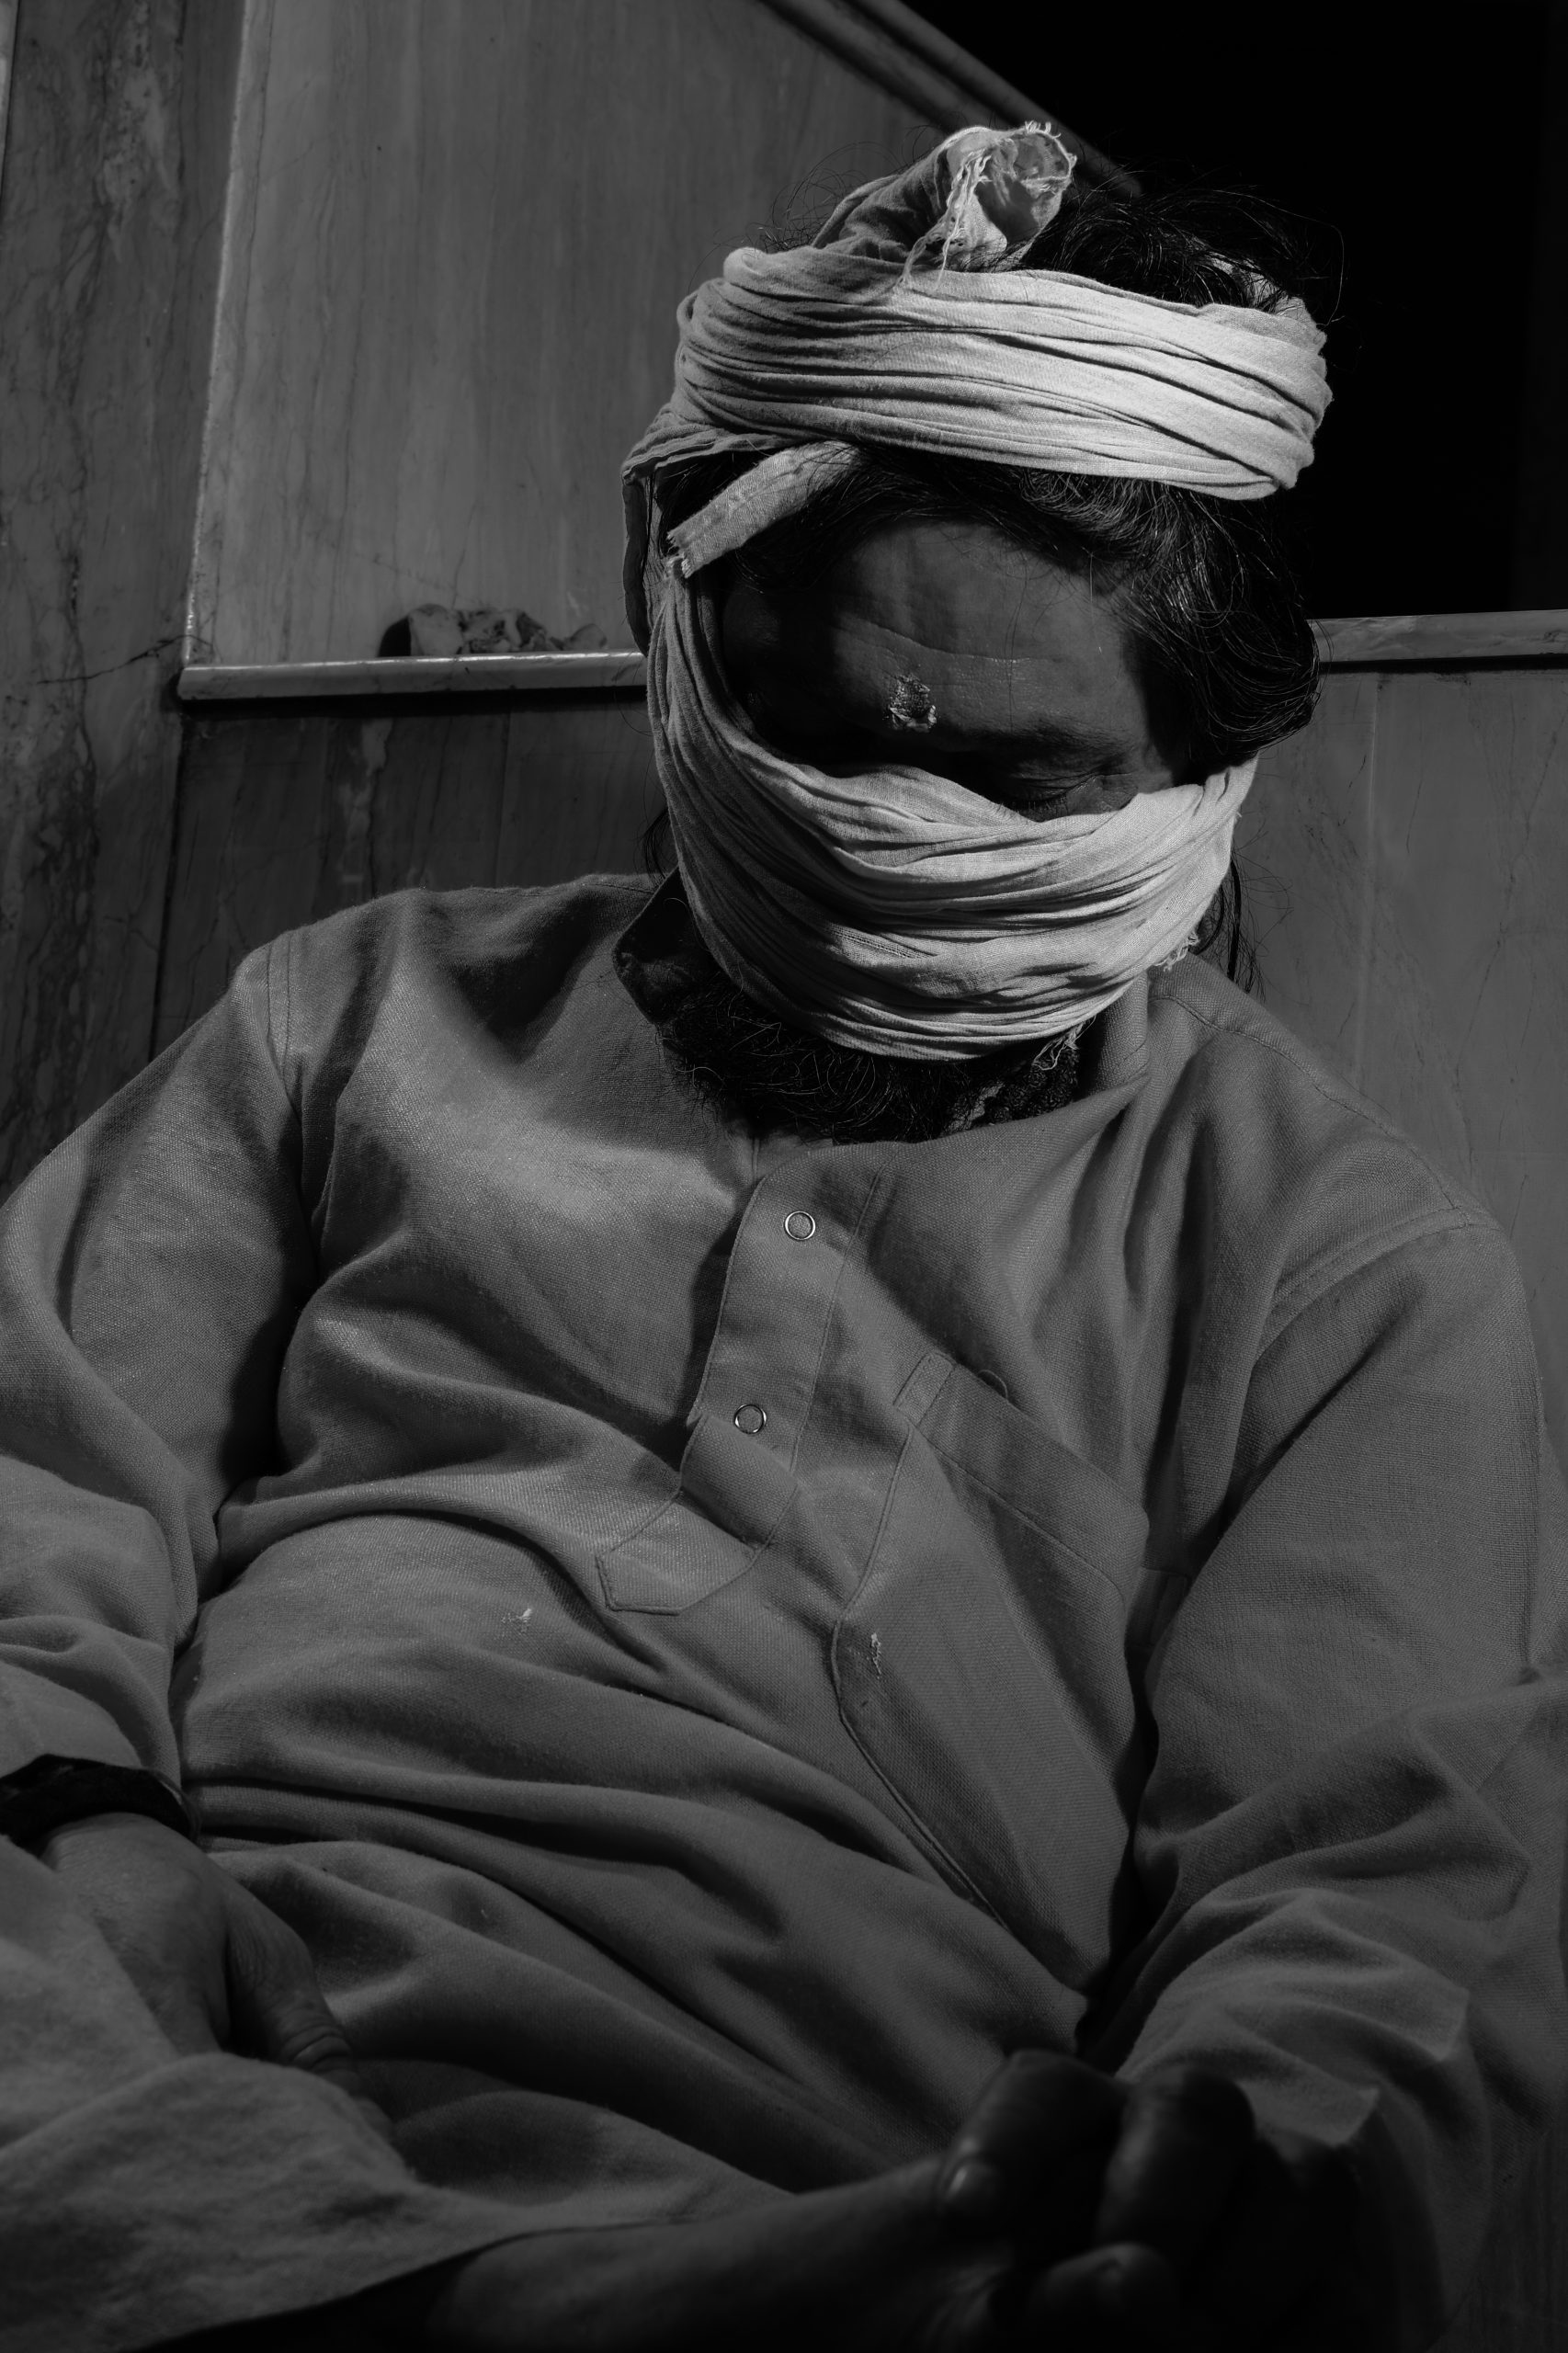 A man sleeping after covering his face